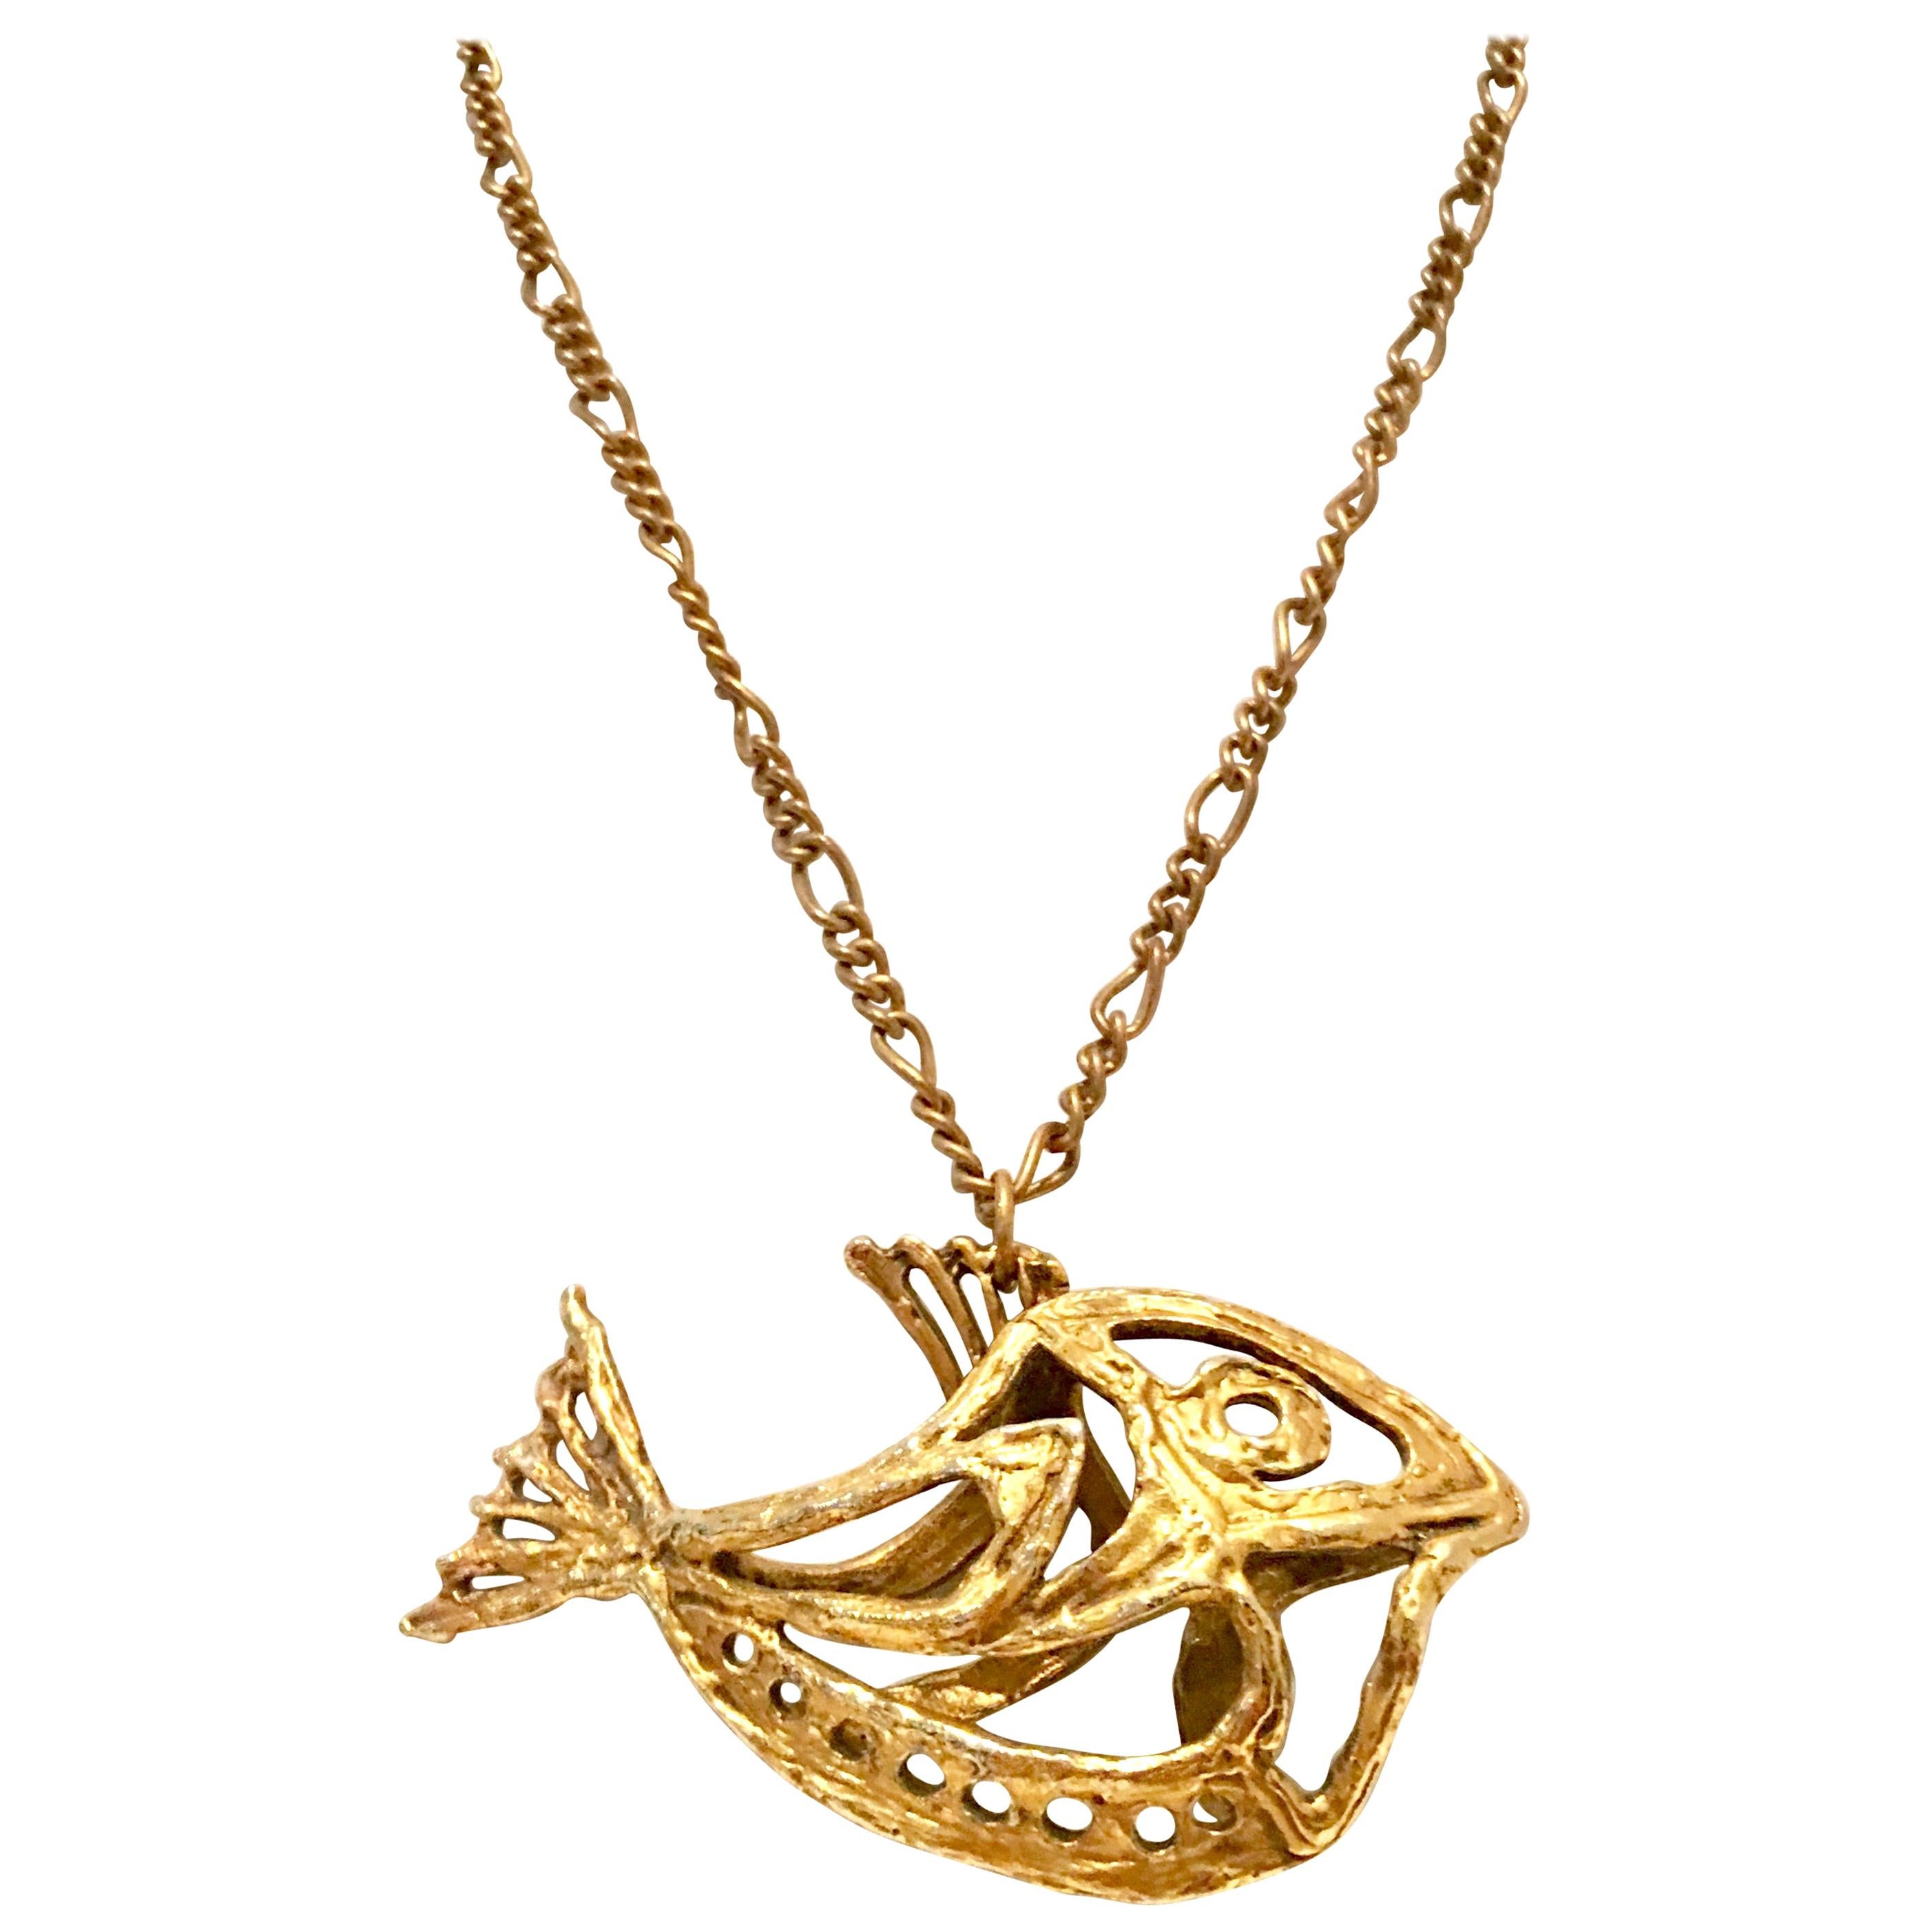 1970'S Monumental Gold  "Fish" Pendant Necklace By, Zavel Silber For Sale